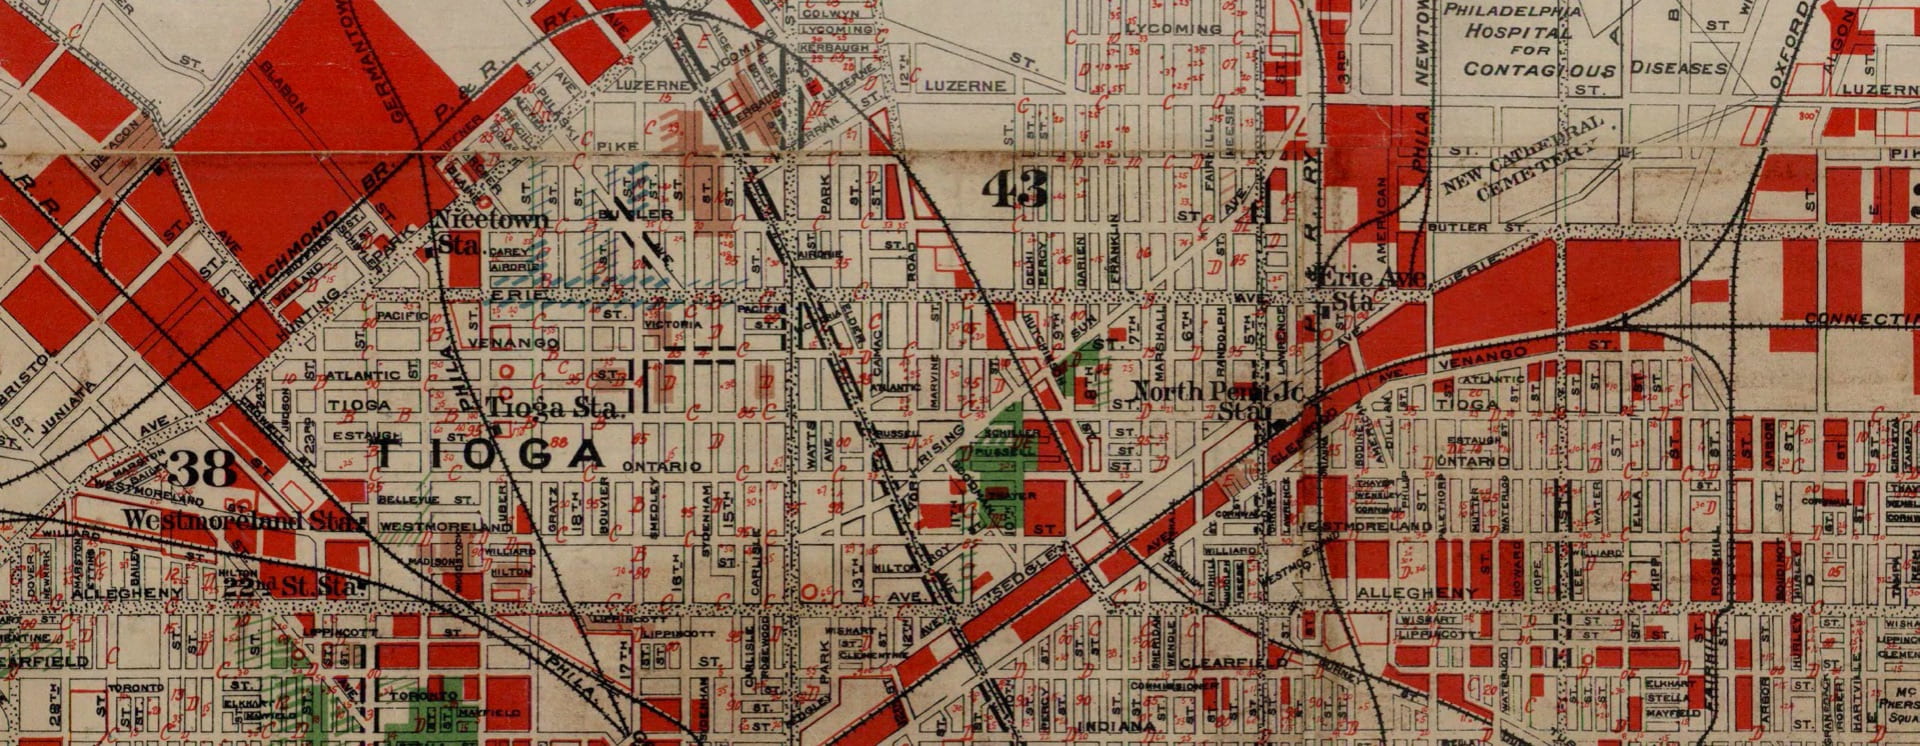 red-lined map of Philadelphia in 1934